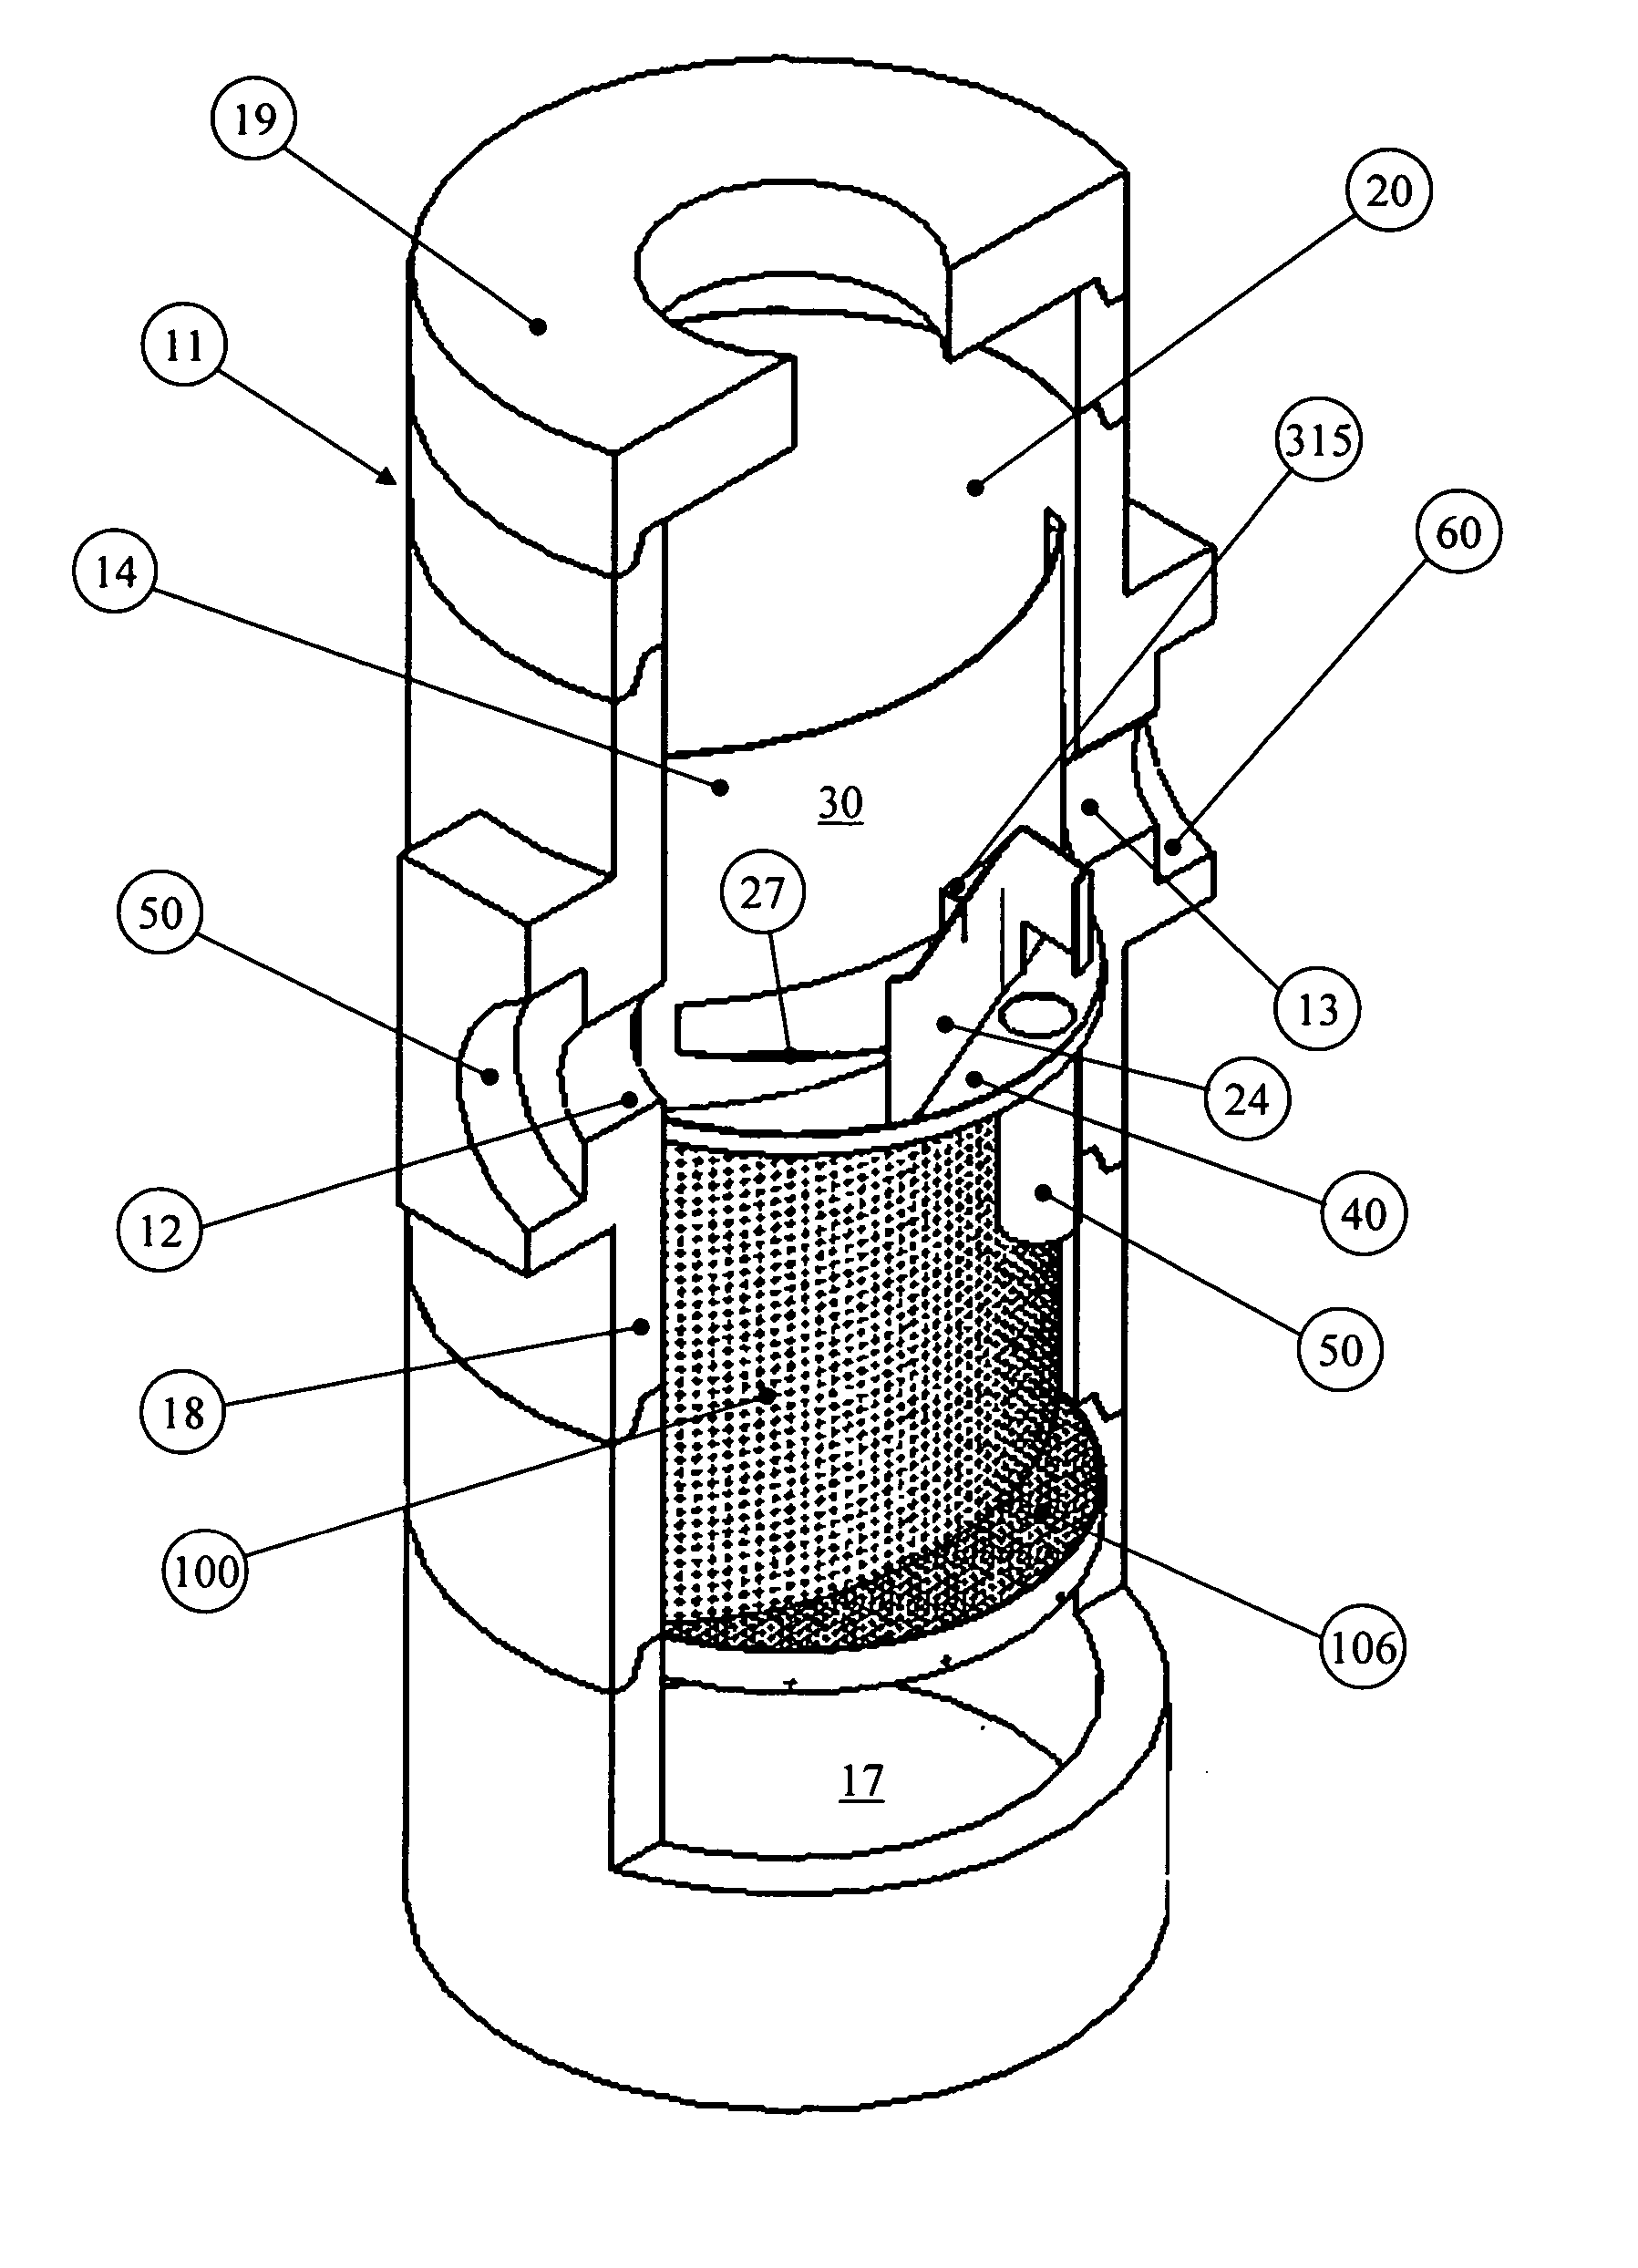 Apparatus for separating particulates from a fluid stream